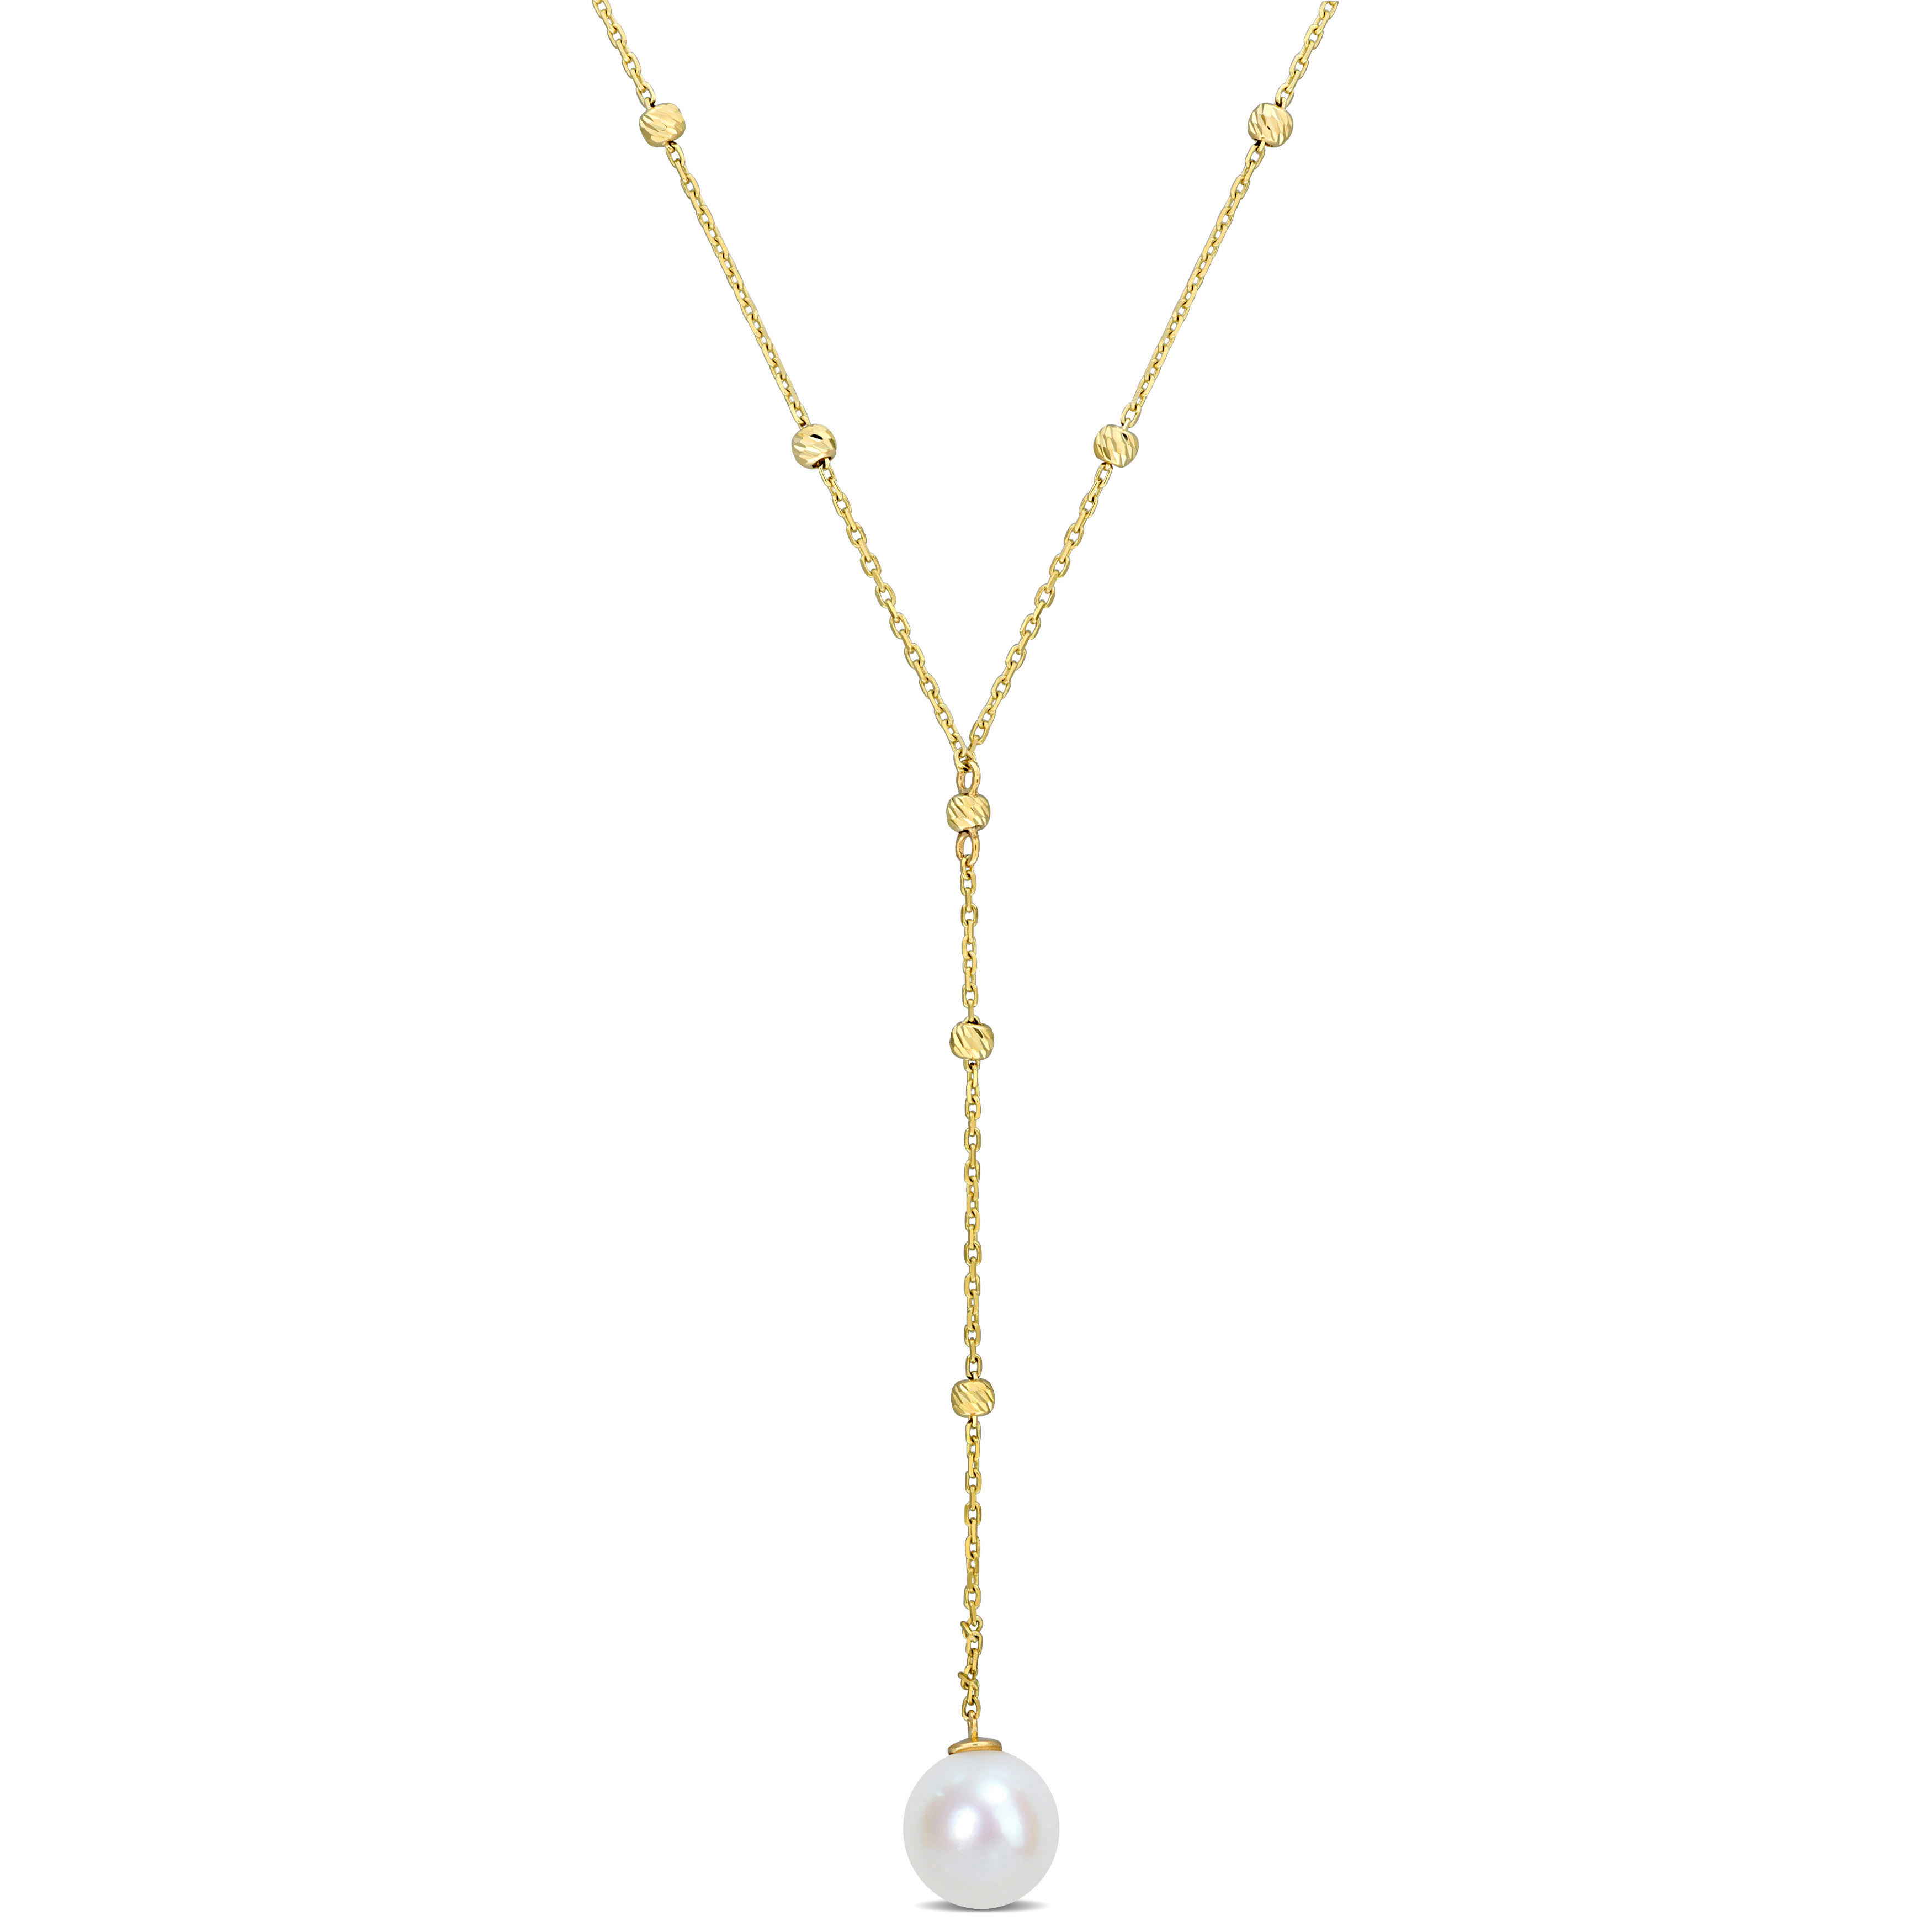 8-8.5 MM Cultured Freshwater Pearl Ball Station Lariant Necklace in 10k Yellow Gold - 16.5 in. + 1.5 in. extender